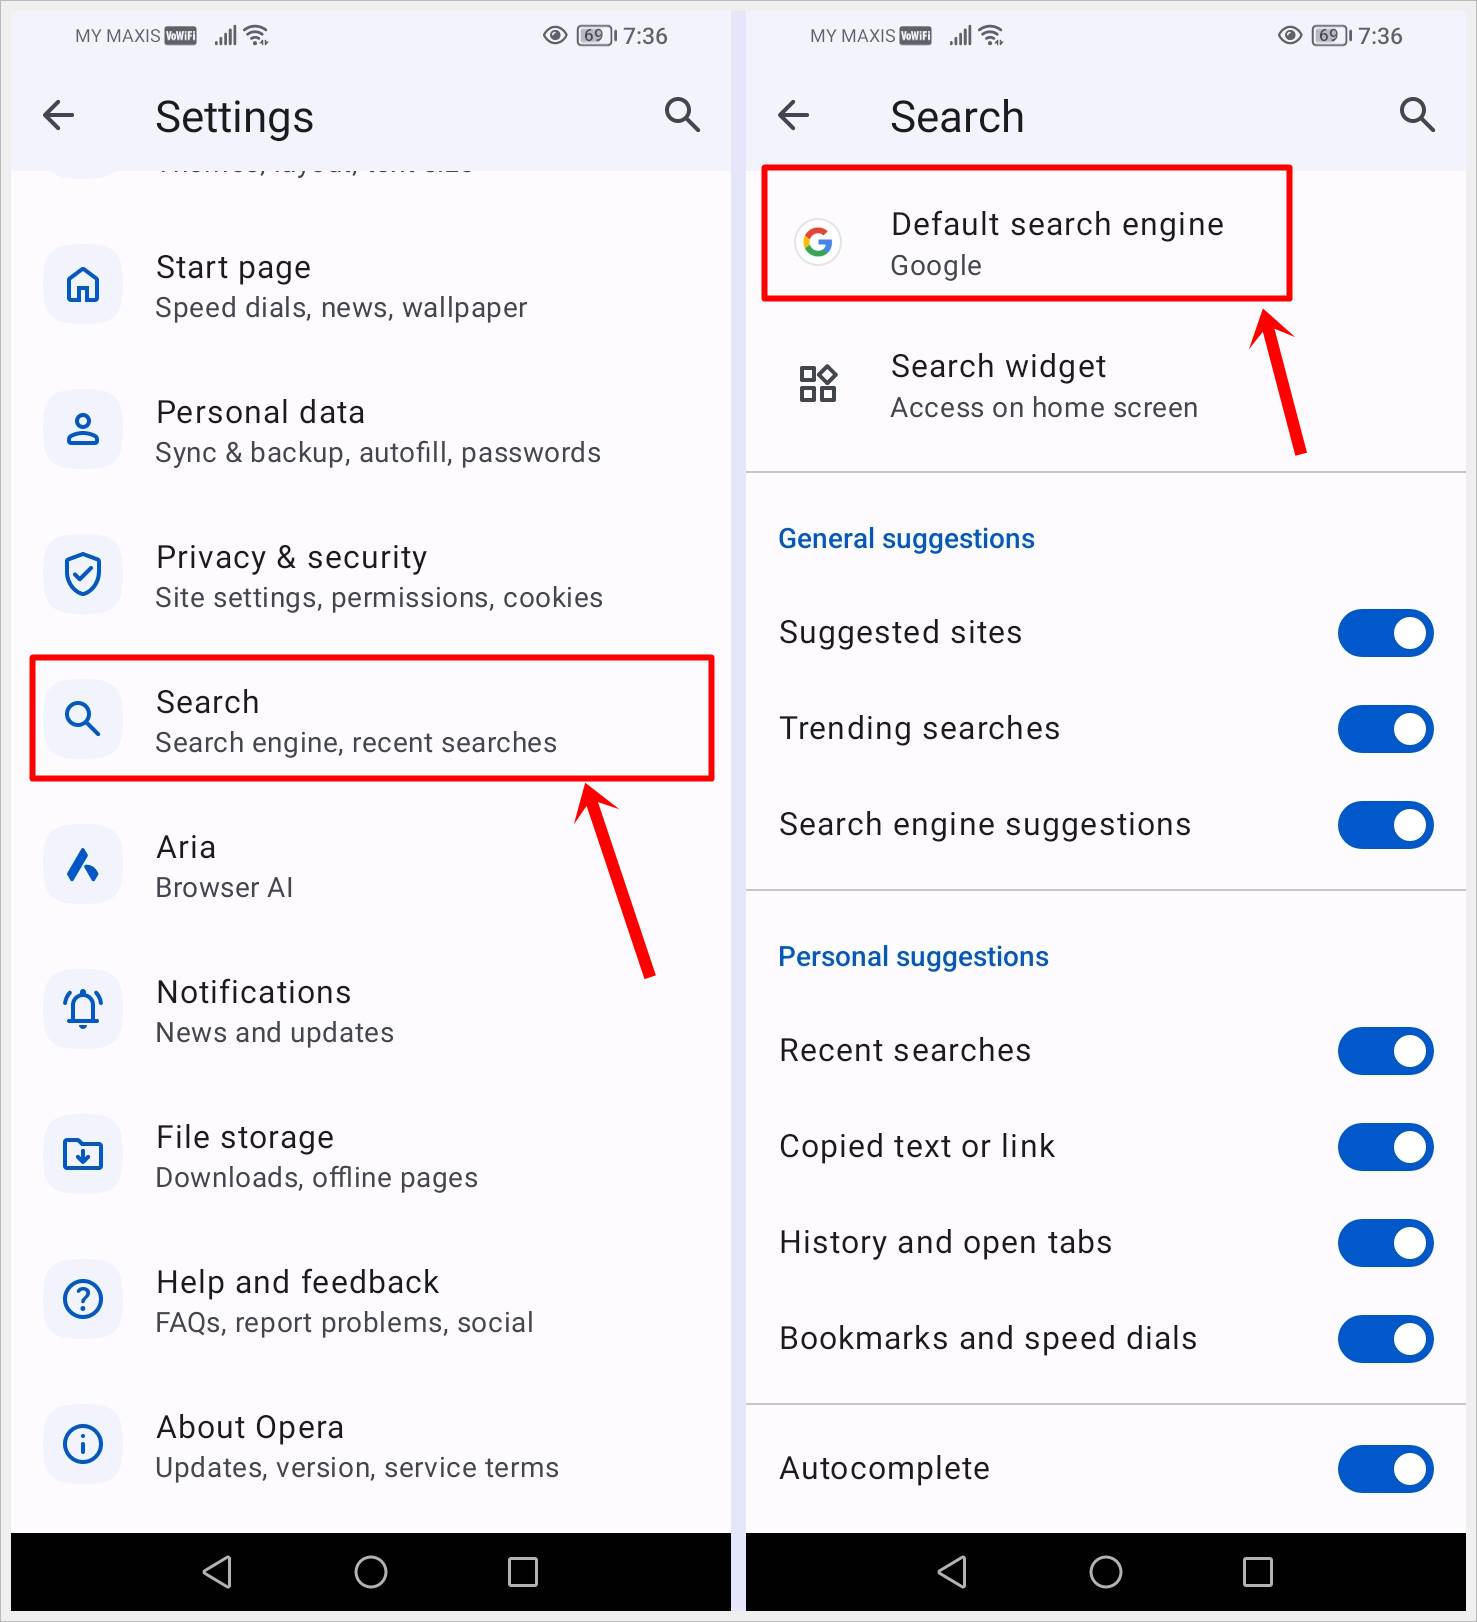 This image shows 2 screenshots from the Opera app for Android. The "Search" and "Default search engine" options are highlighted on each screenshot, respectively.